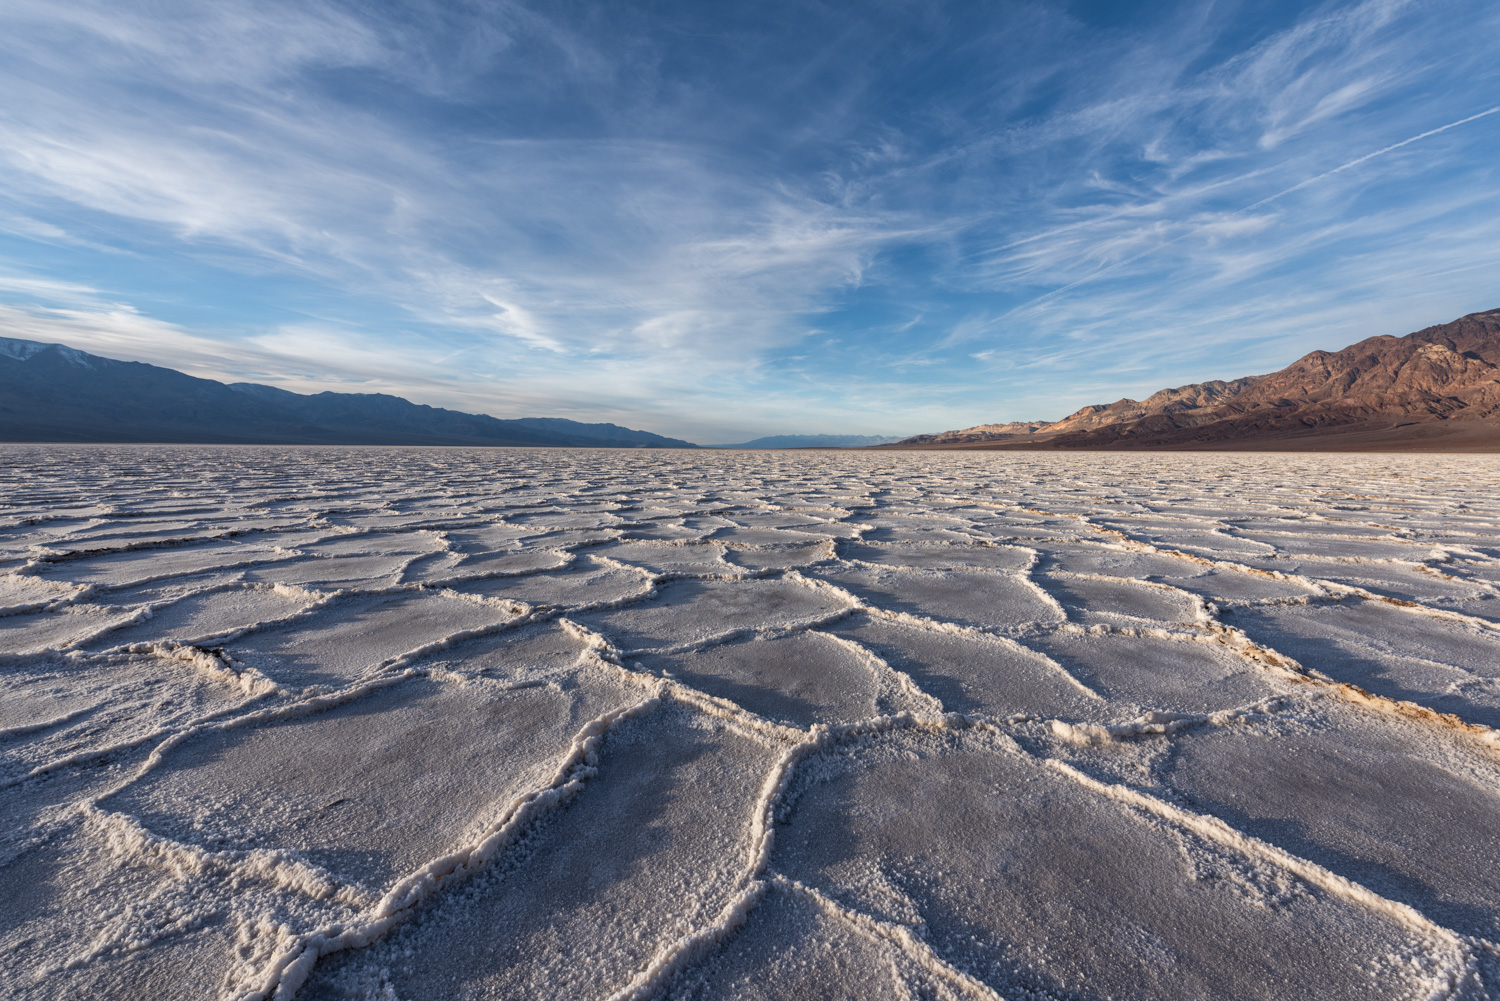 death valley, death valley national park, california, badwater, badwater basin, desert, american southwest